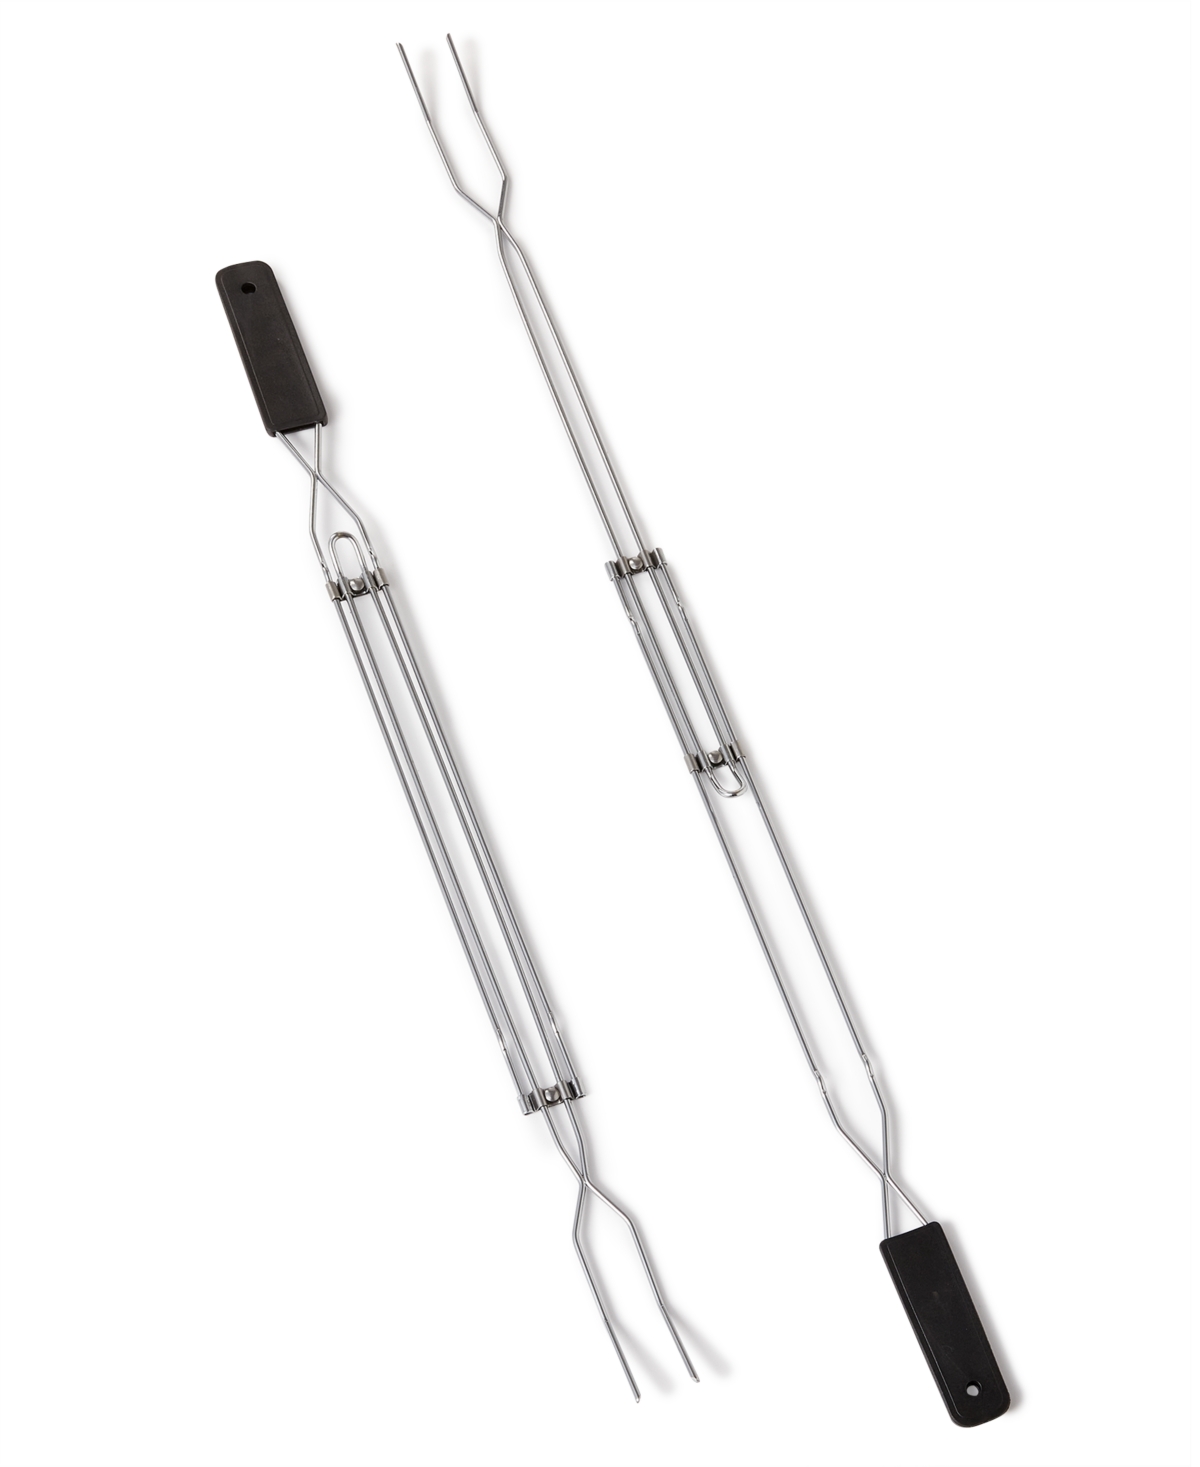 Shop The Cellar Set Of 2 Extendable Marshmallow Skewers, Created For Macy's In No Color